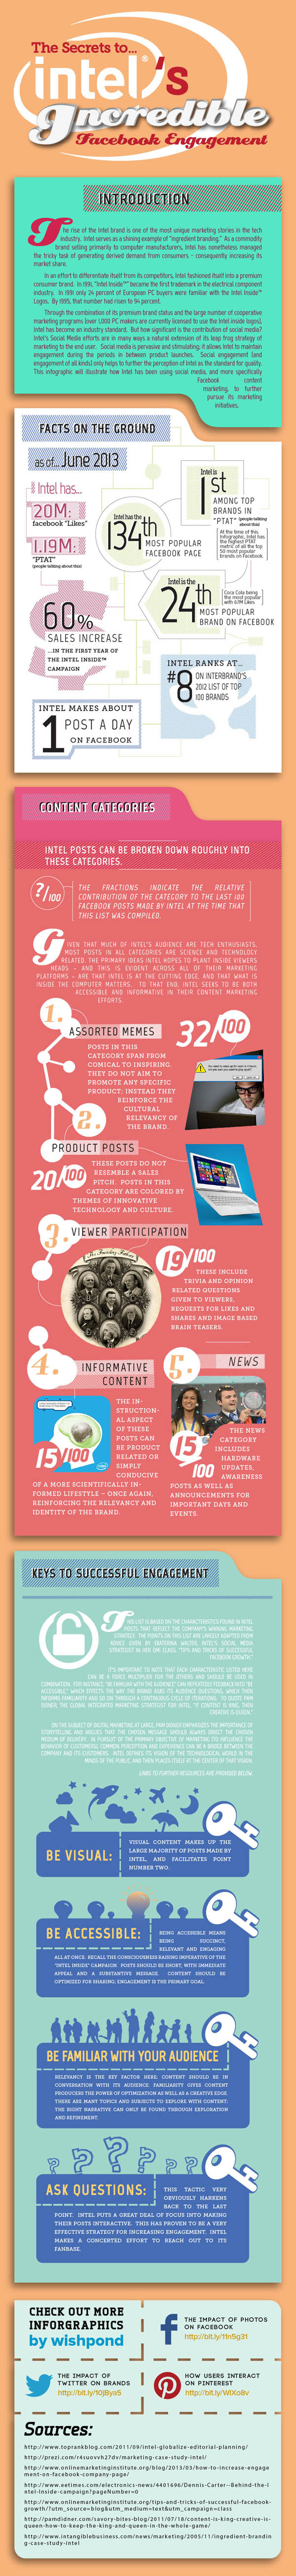 The Secrets to Intel's Incredible Facebook Engagement Infographic